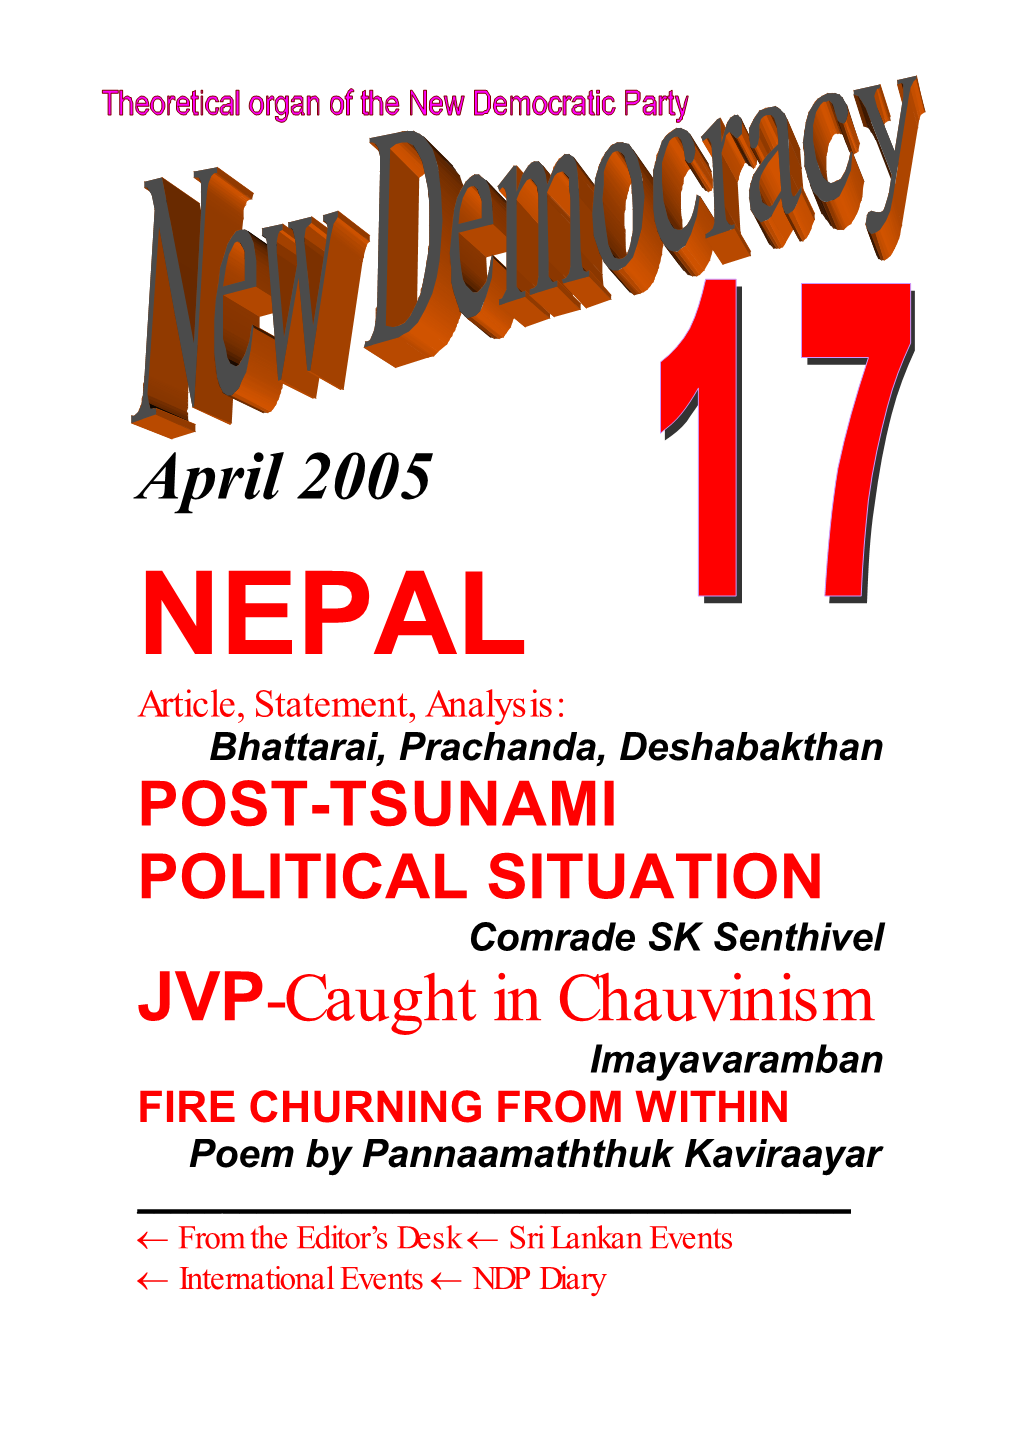 April 2005 JVP-Caught in Chauvinism